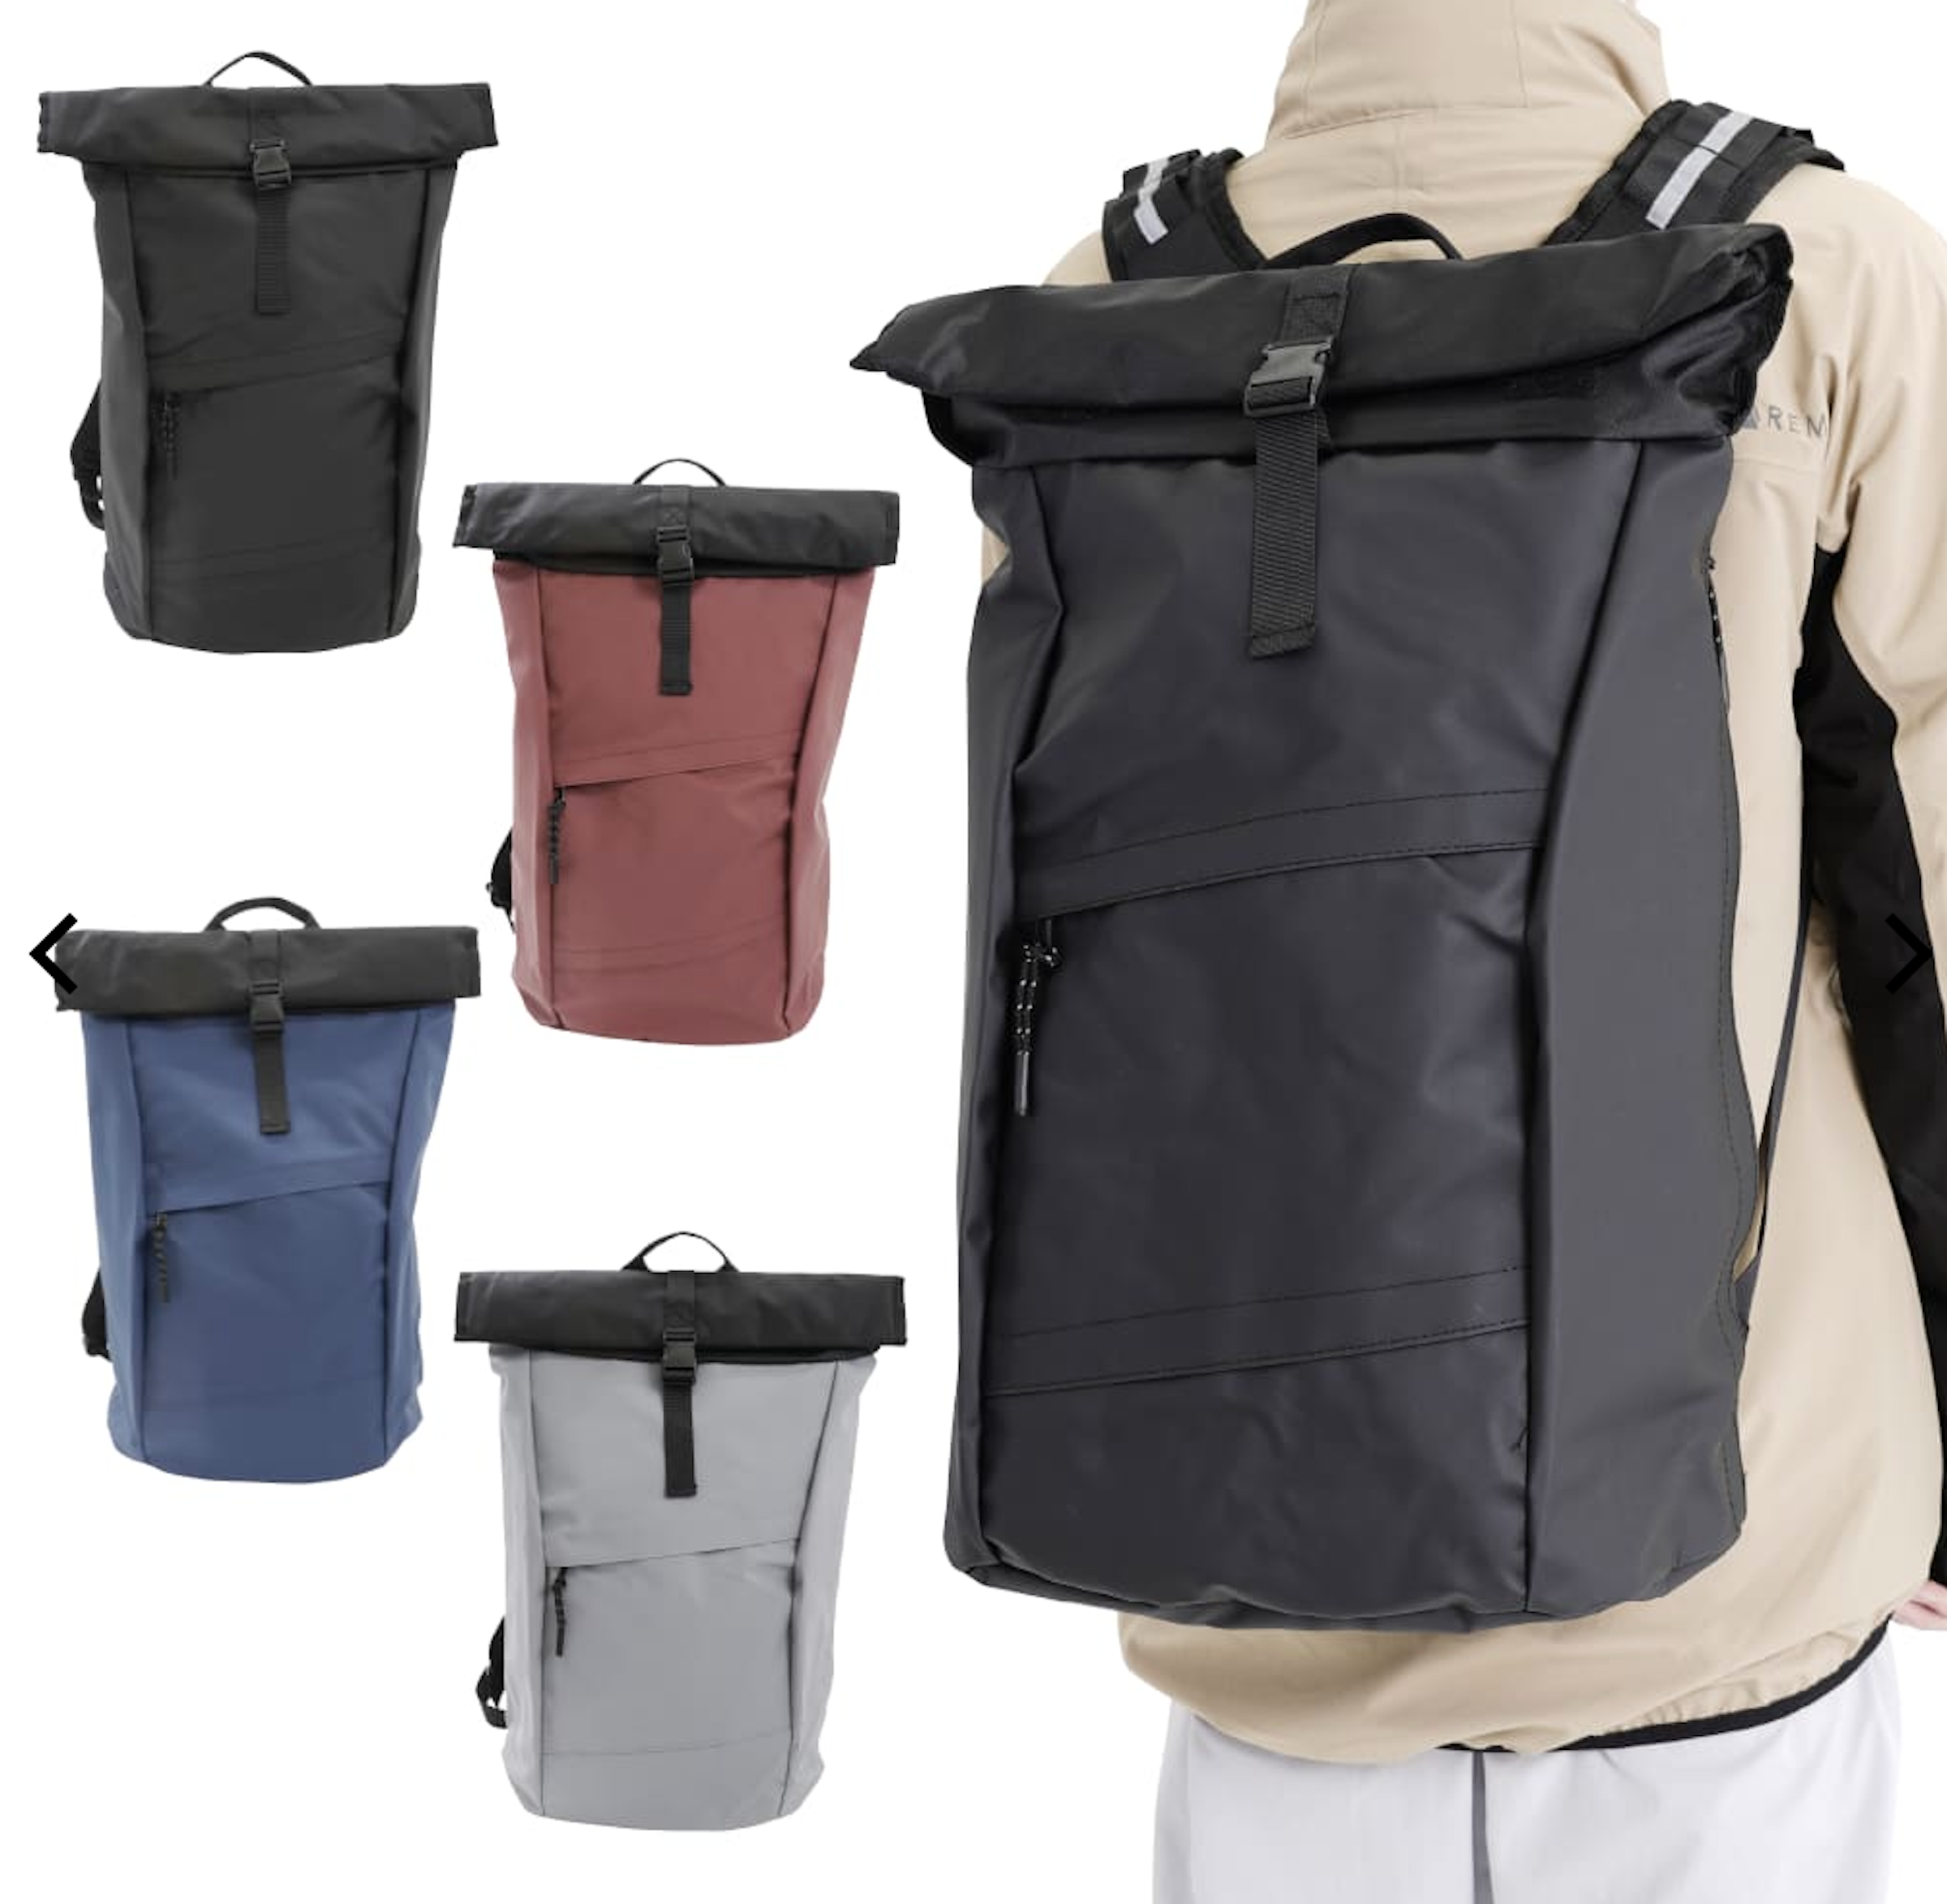 The current color variations of the 'Waterproof Messenger Bag'